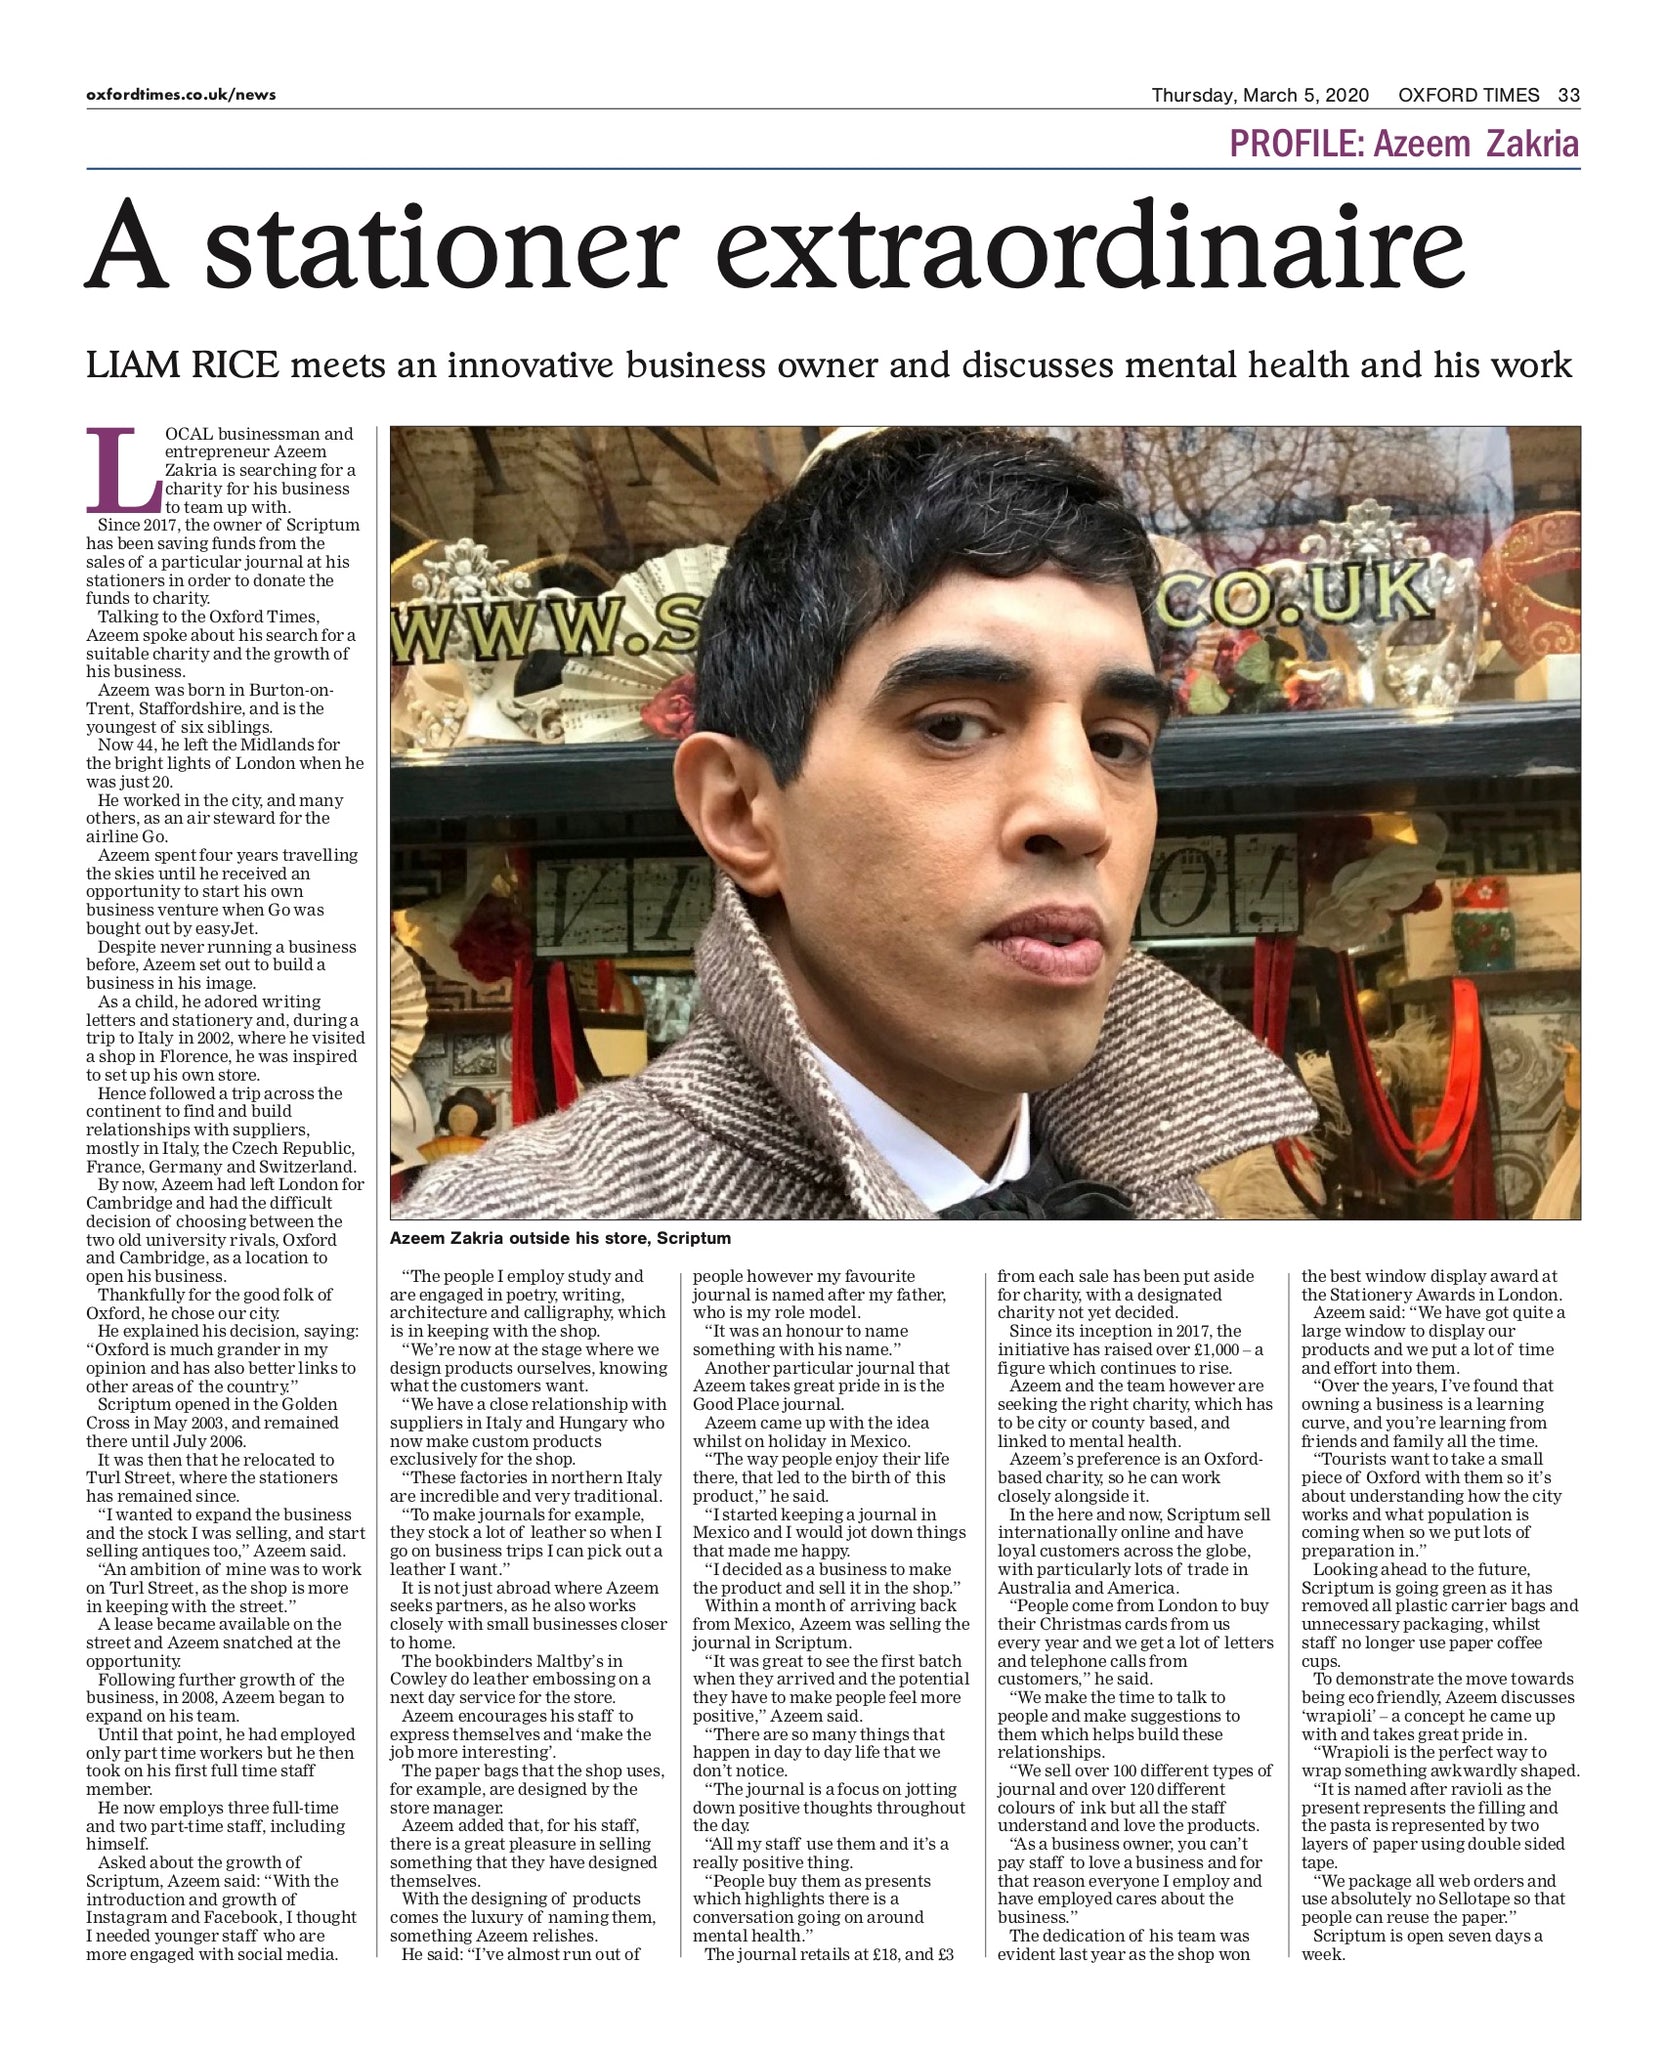 Oxford Times Interview